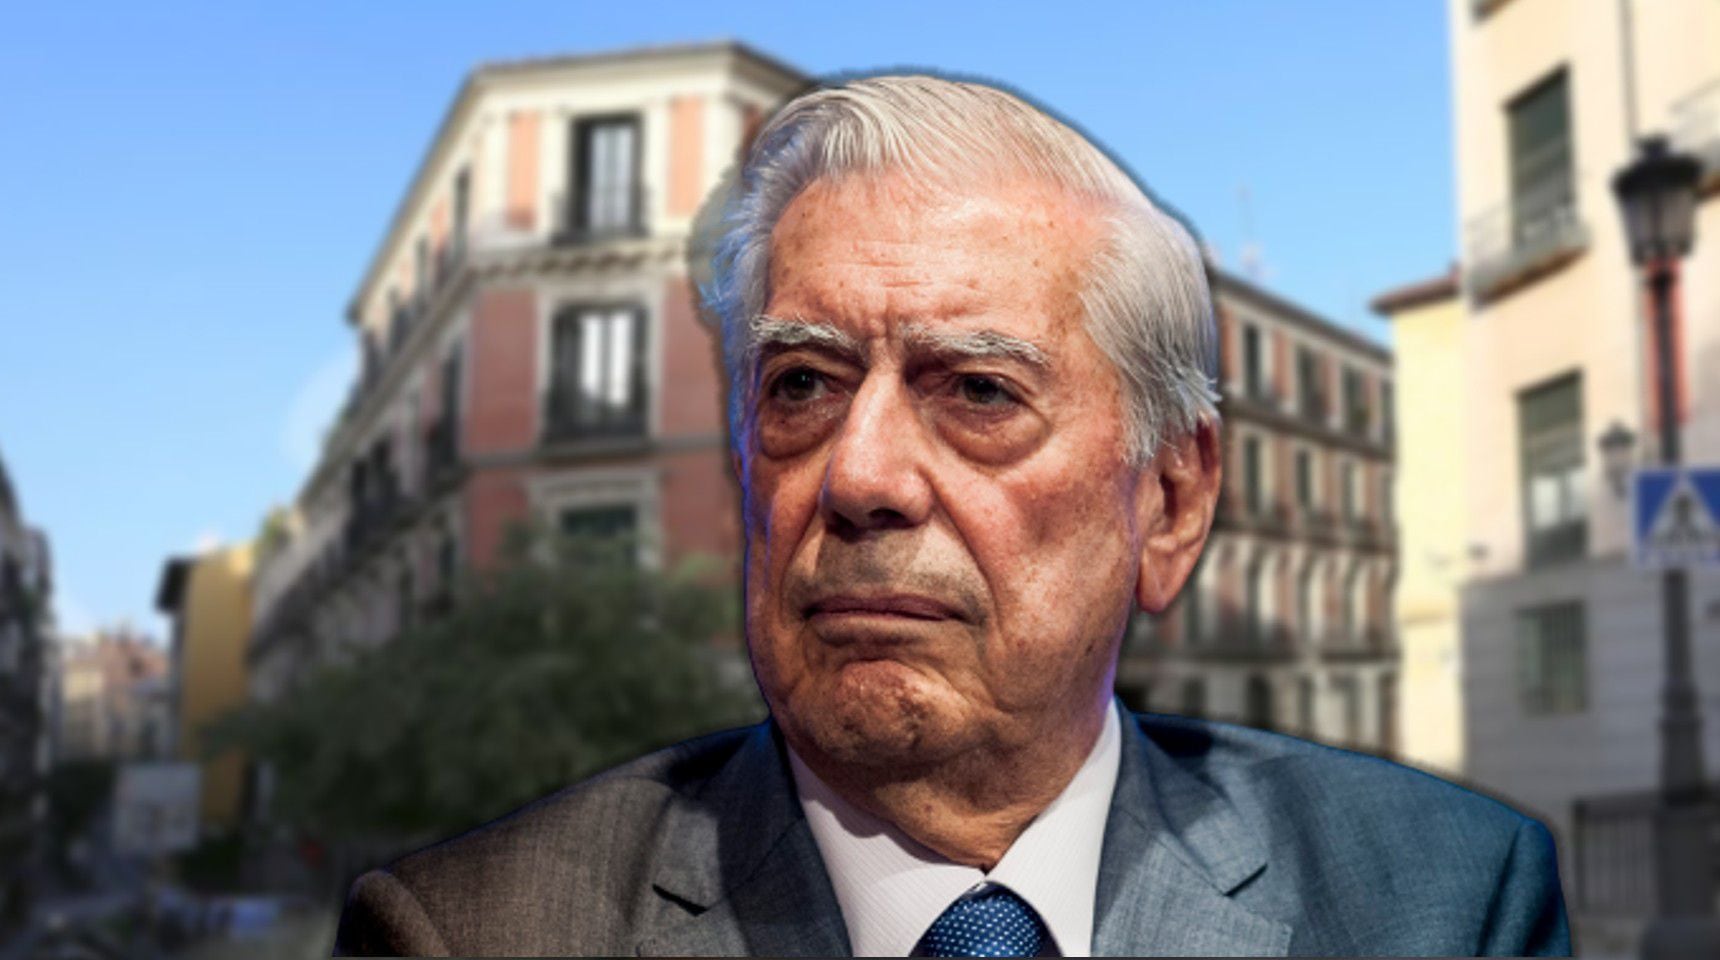 Mario Vargas Llosa, in an archive image.  In the background, the building where his house is located in Madrid.  (Getty Images)